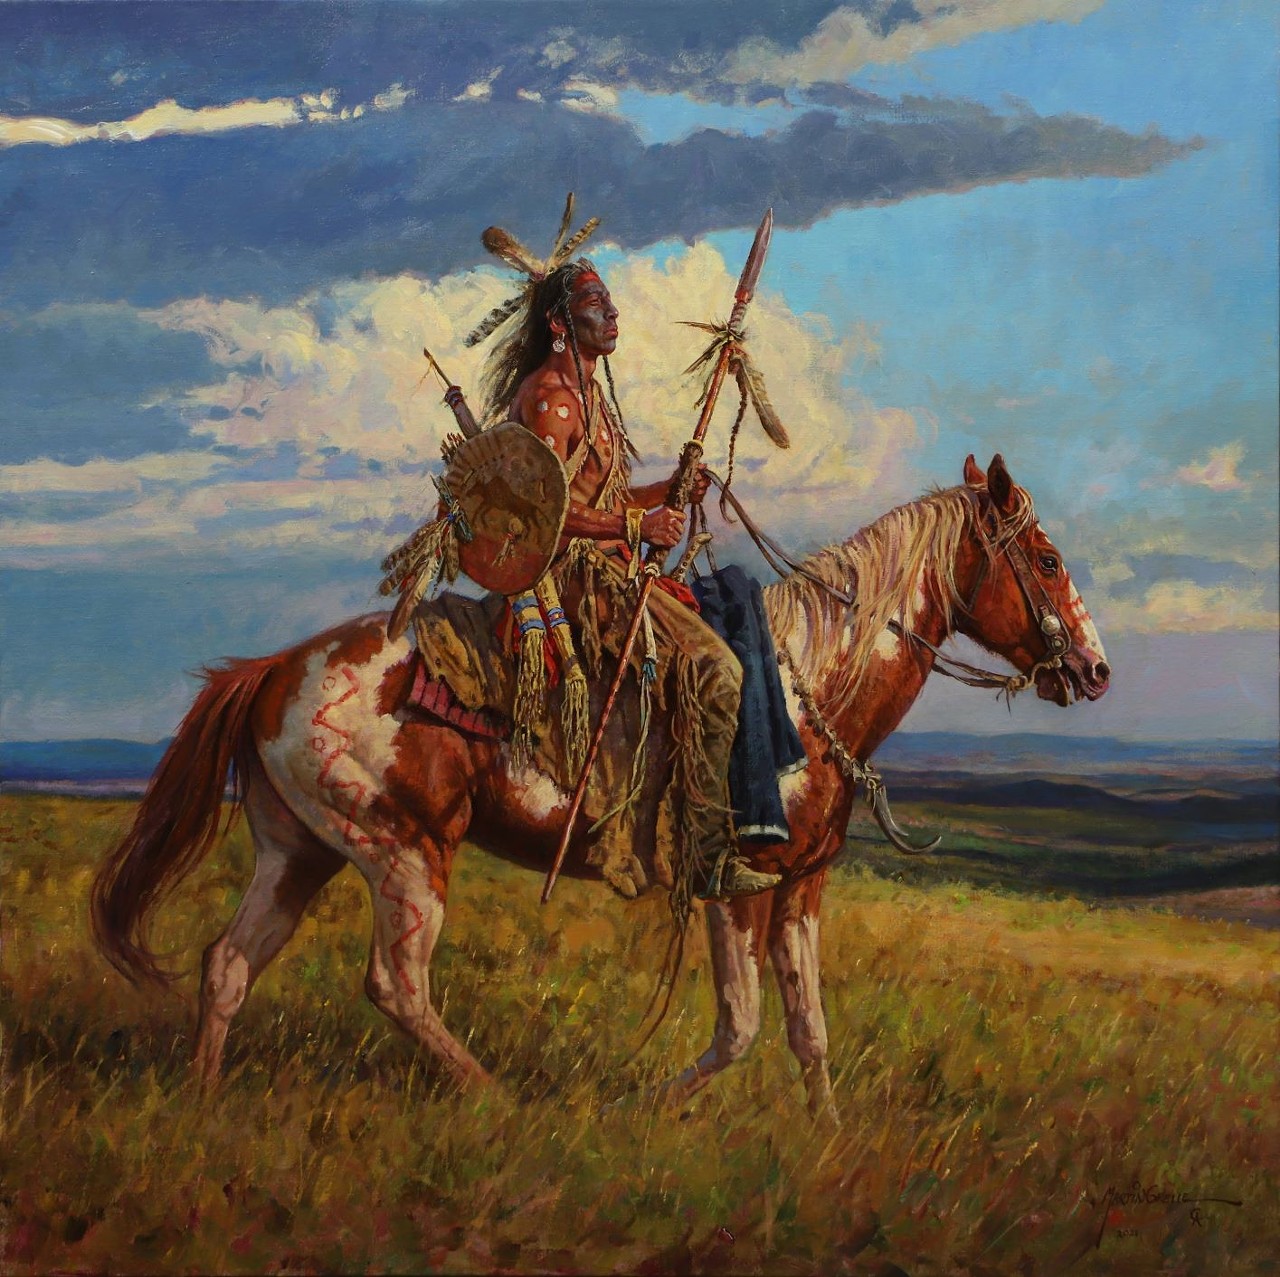 Martin Grelle, "His Storm Has Passed", Acrylic and oil on linen, 30" x 30", $55,000-$70,000